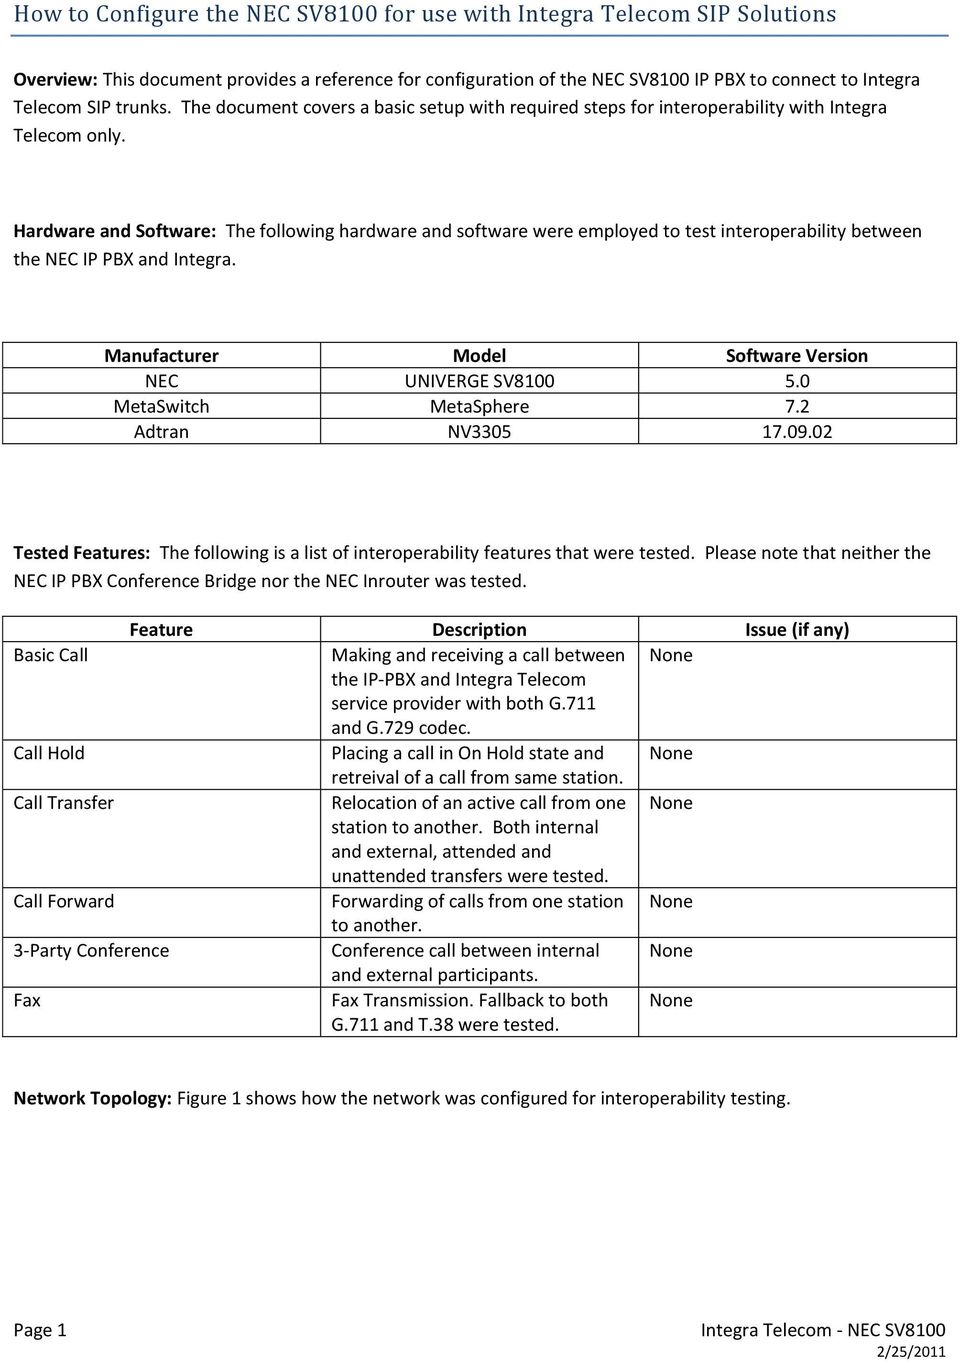 Hardware and Software: The following hardware and software were employed to test interoperability between the NEC IP PBX and Integra. Manufacturer Model Software Version NEC UNIVERGE SV8100 5.